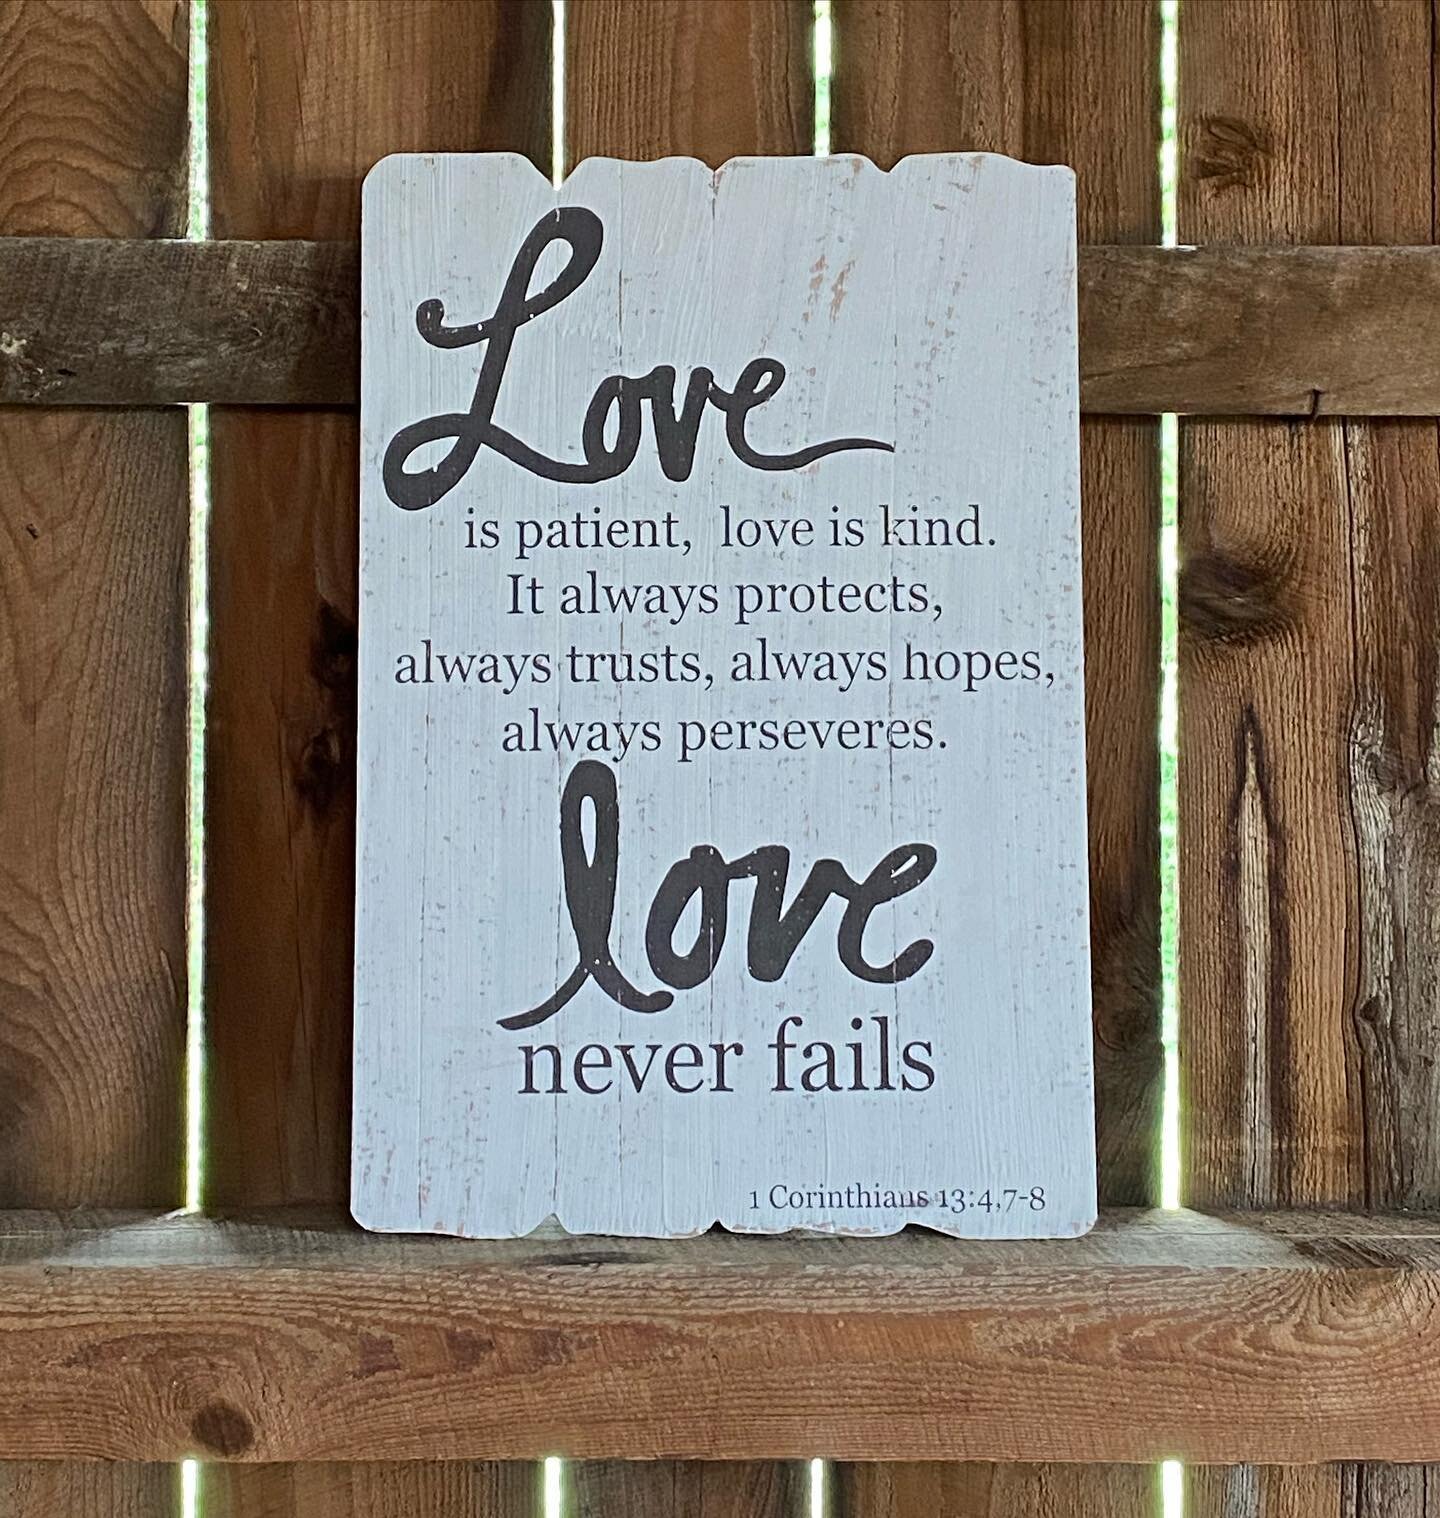 Love is patient, love is kind!